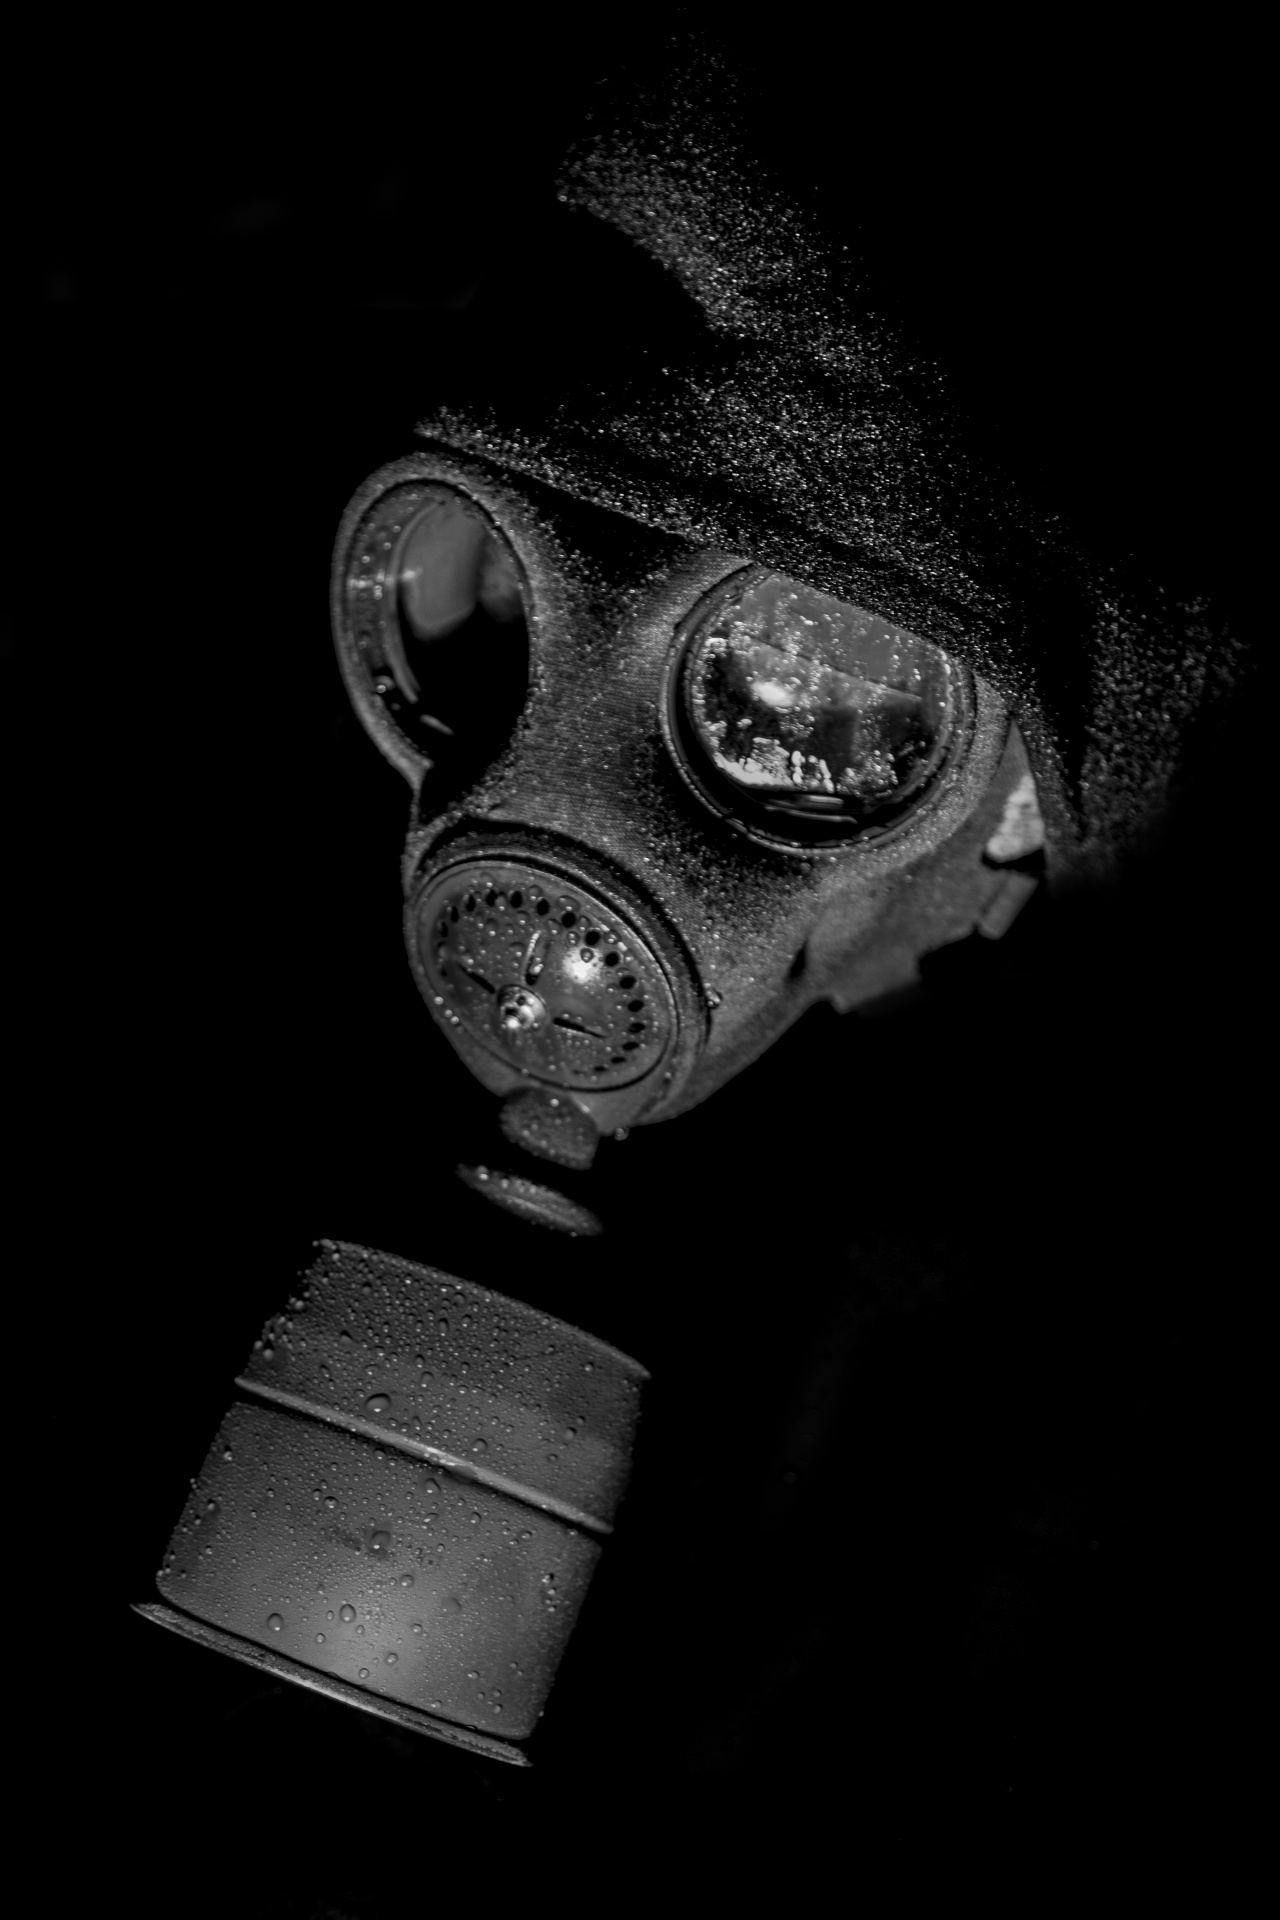 Gas mask is a mask used to protect the user from inhaling airborne pollutants and toxic gases